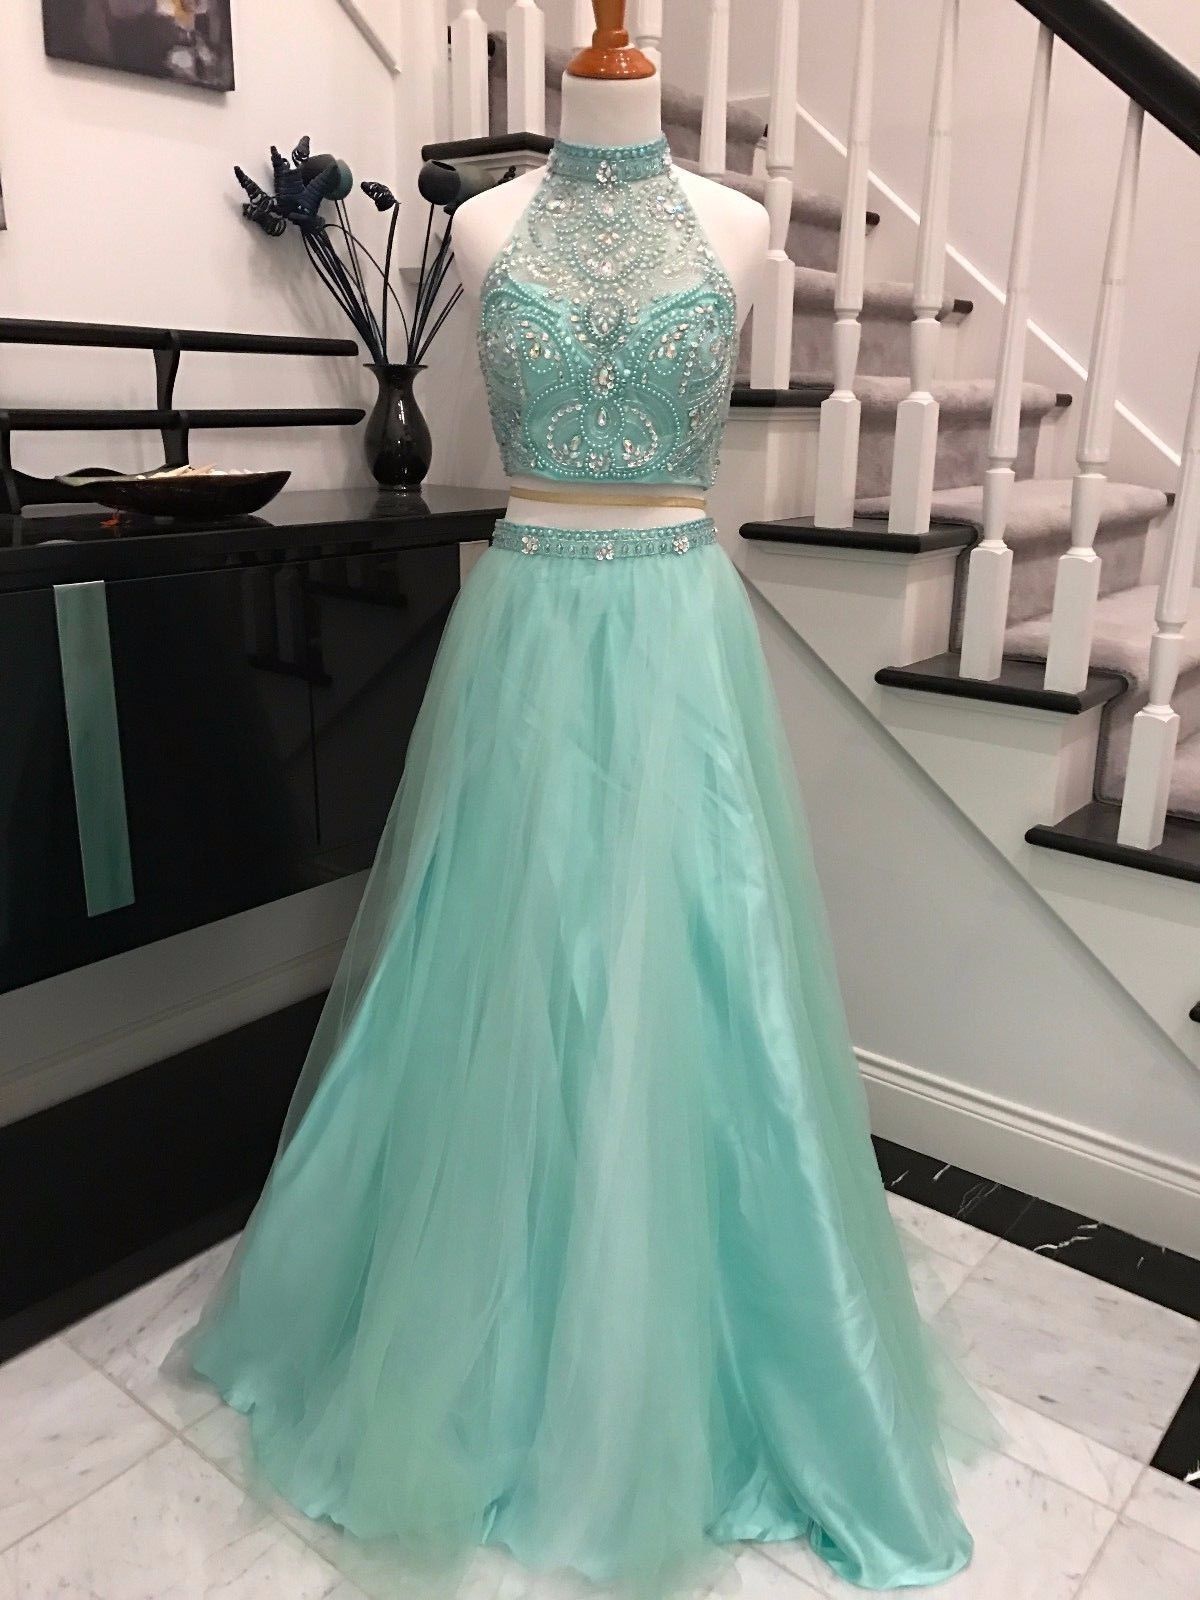 Beaded Embellished Two-piece Prom Dress Featuring High Halter Crop Top And Floor Length Tulle A-line Skirt